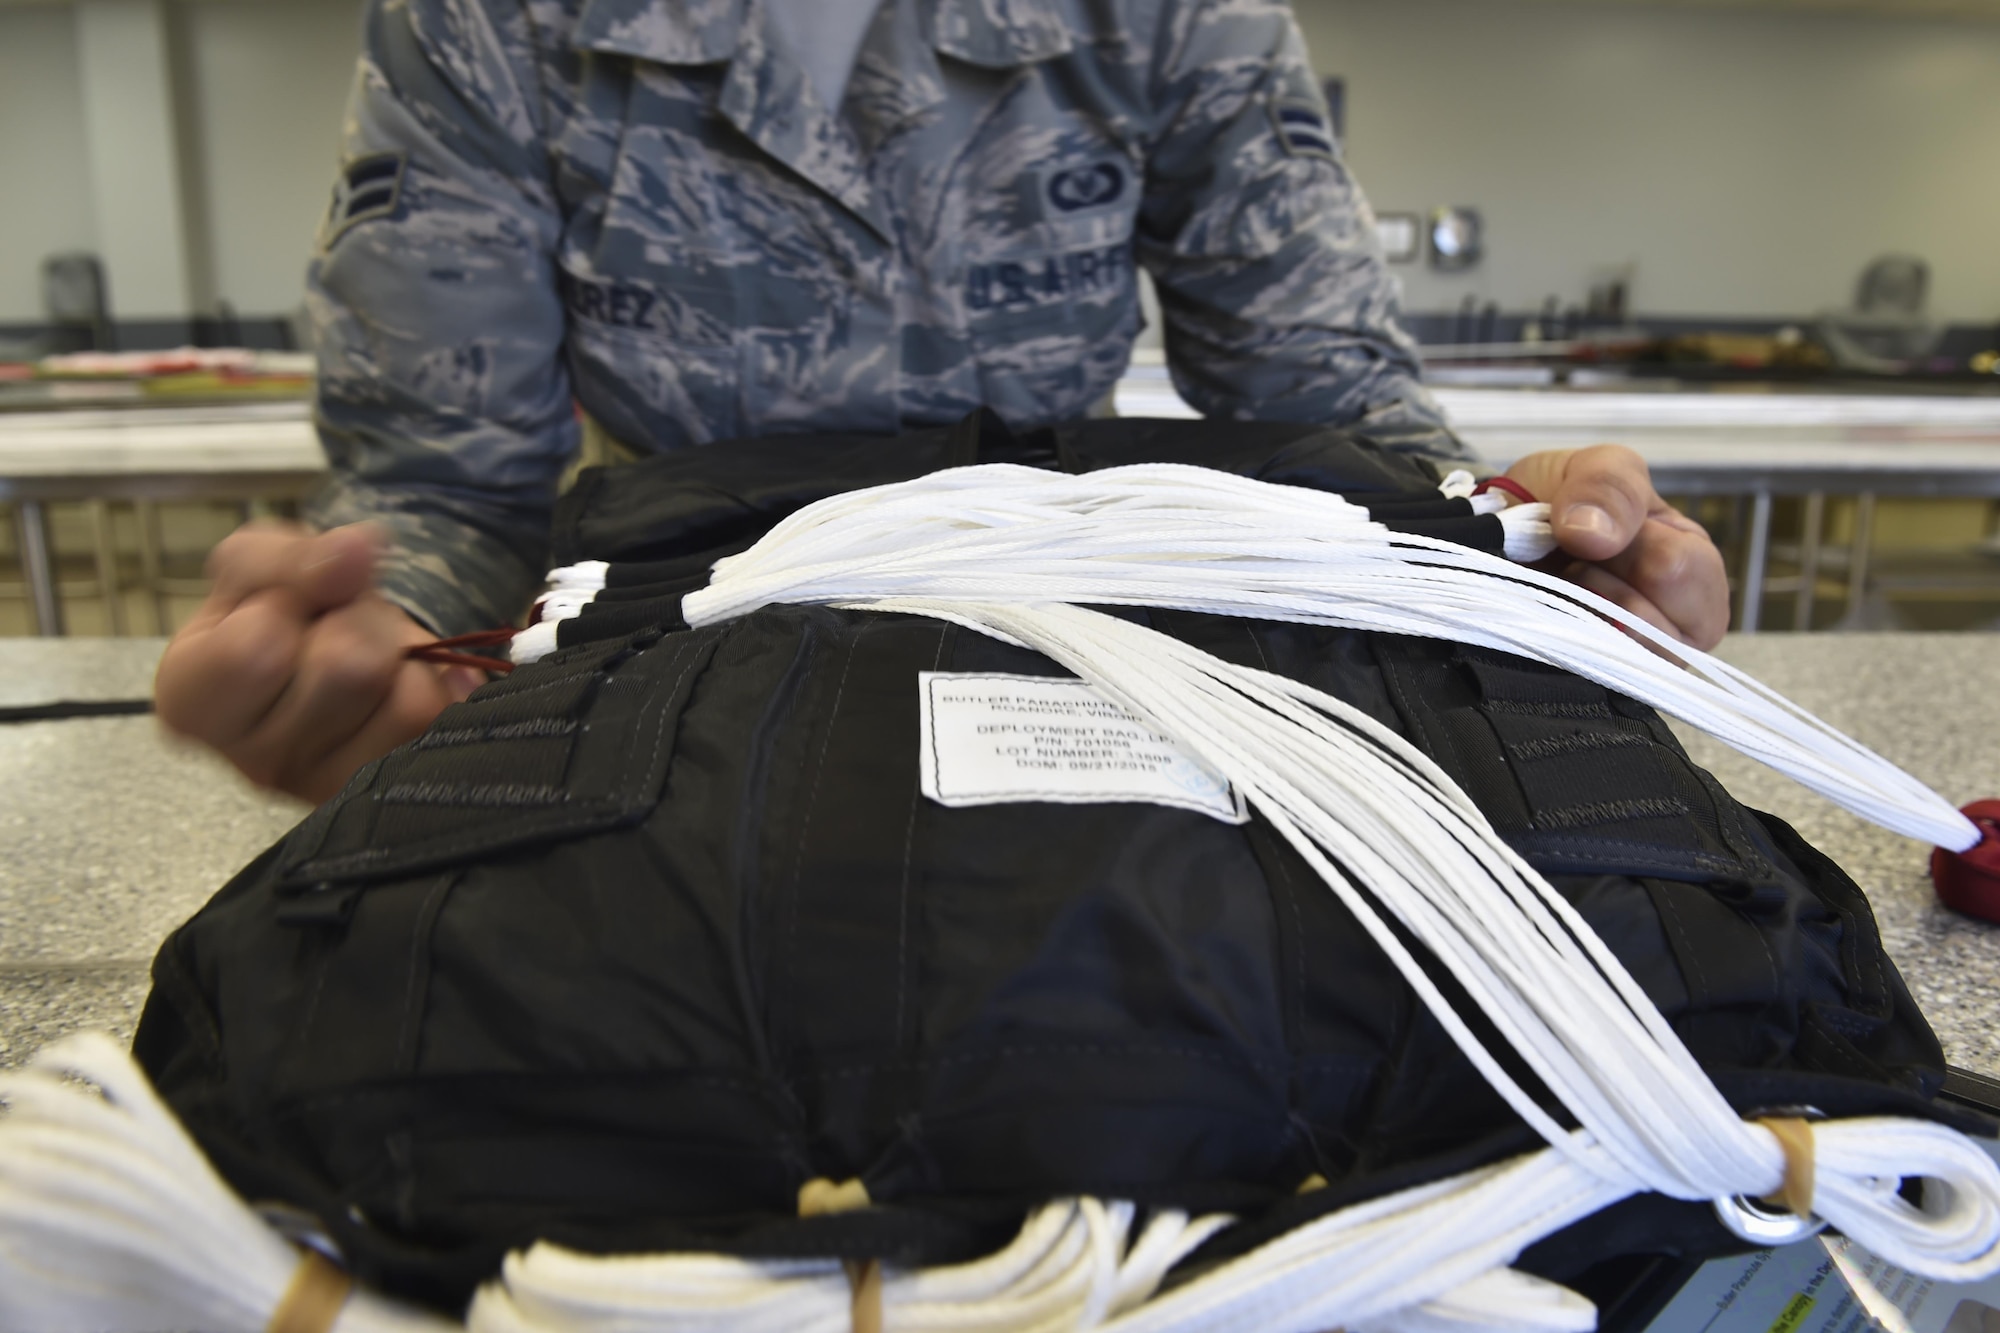 Airman 1st Class Maria Perez, an aircrew flight equipment specialist with the 4th Special Operations Squadron, secures suspension lines for a low-profile parachute to a deployment bag at Hurlburt Field, Fla., Jan. 25, 2017. The LPP is configured for use in the AC-130 gunships and replaced the BA-22 parachute. The LPP weighs approximately 20 pounds, roughly half of the BA-22. (U.S. Air Force photo by Airman 1st Class Joseph Pick)